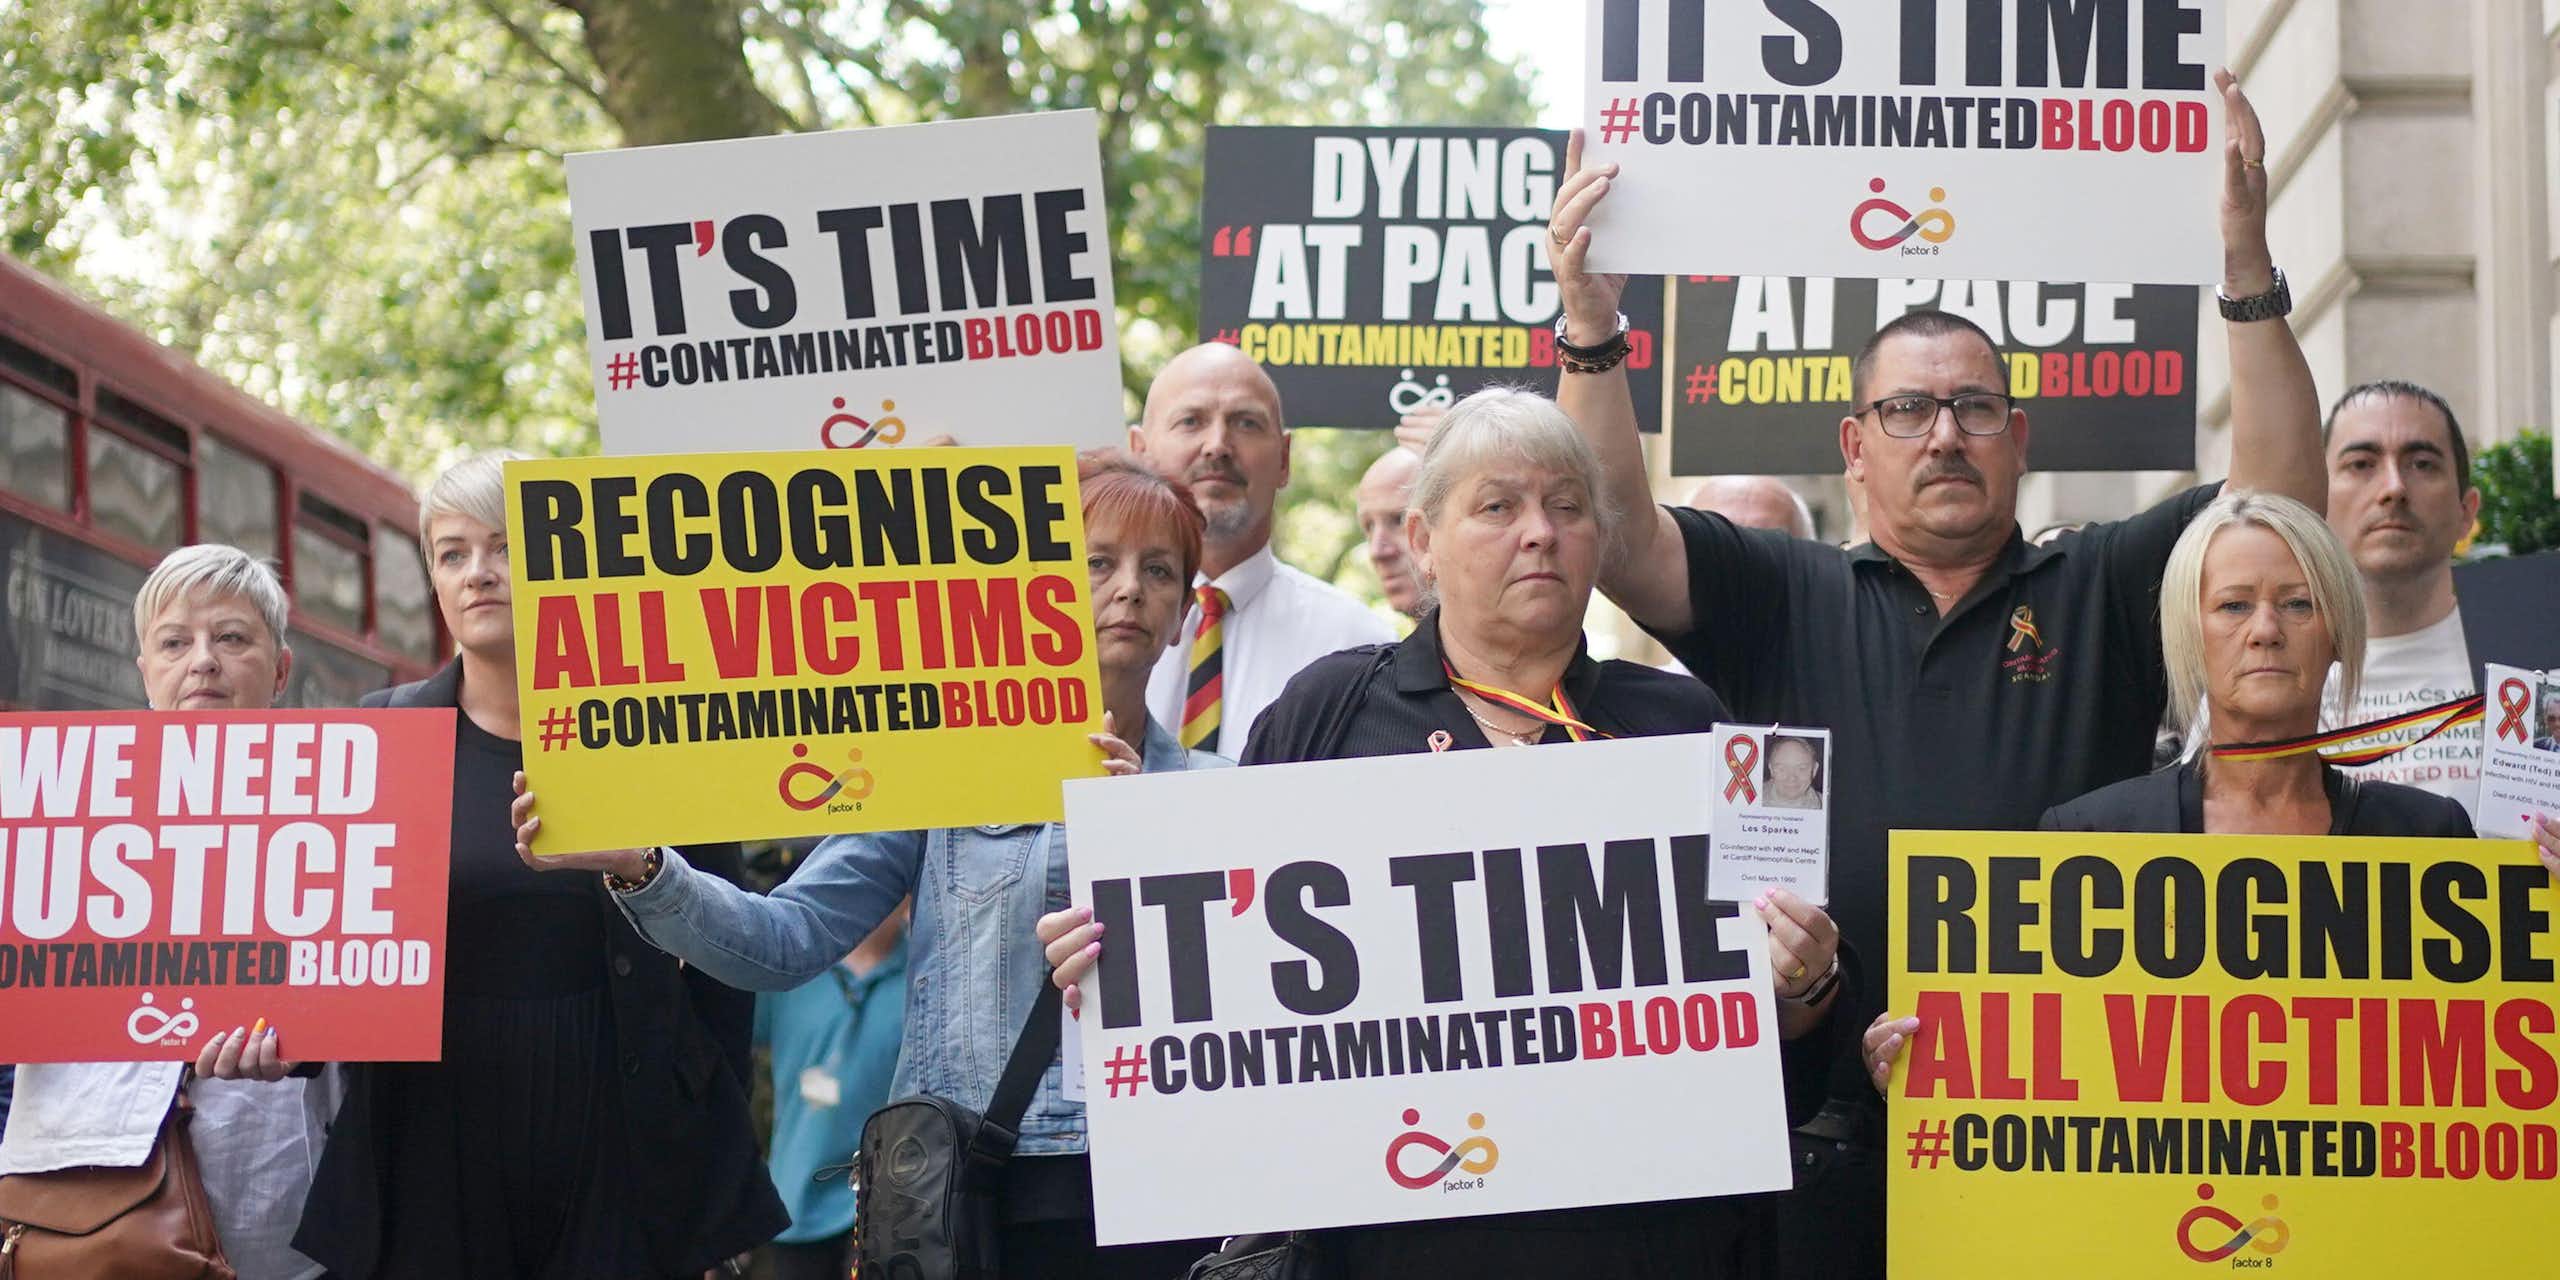 A group of people holding protest signs in red, yellow, black and white colours that say 'it's time' and 'recognise all victims' with the hashtag Contaminated Blood